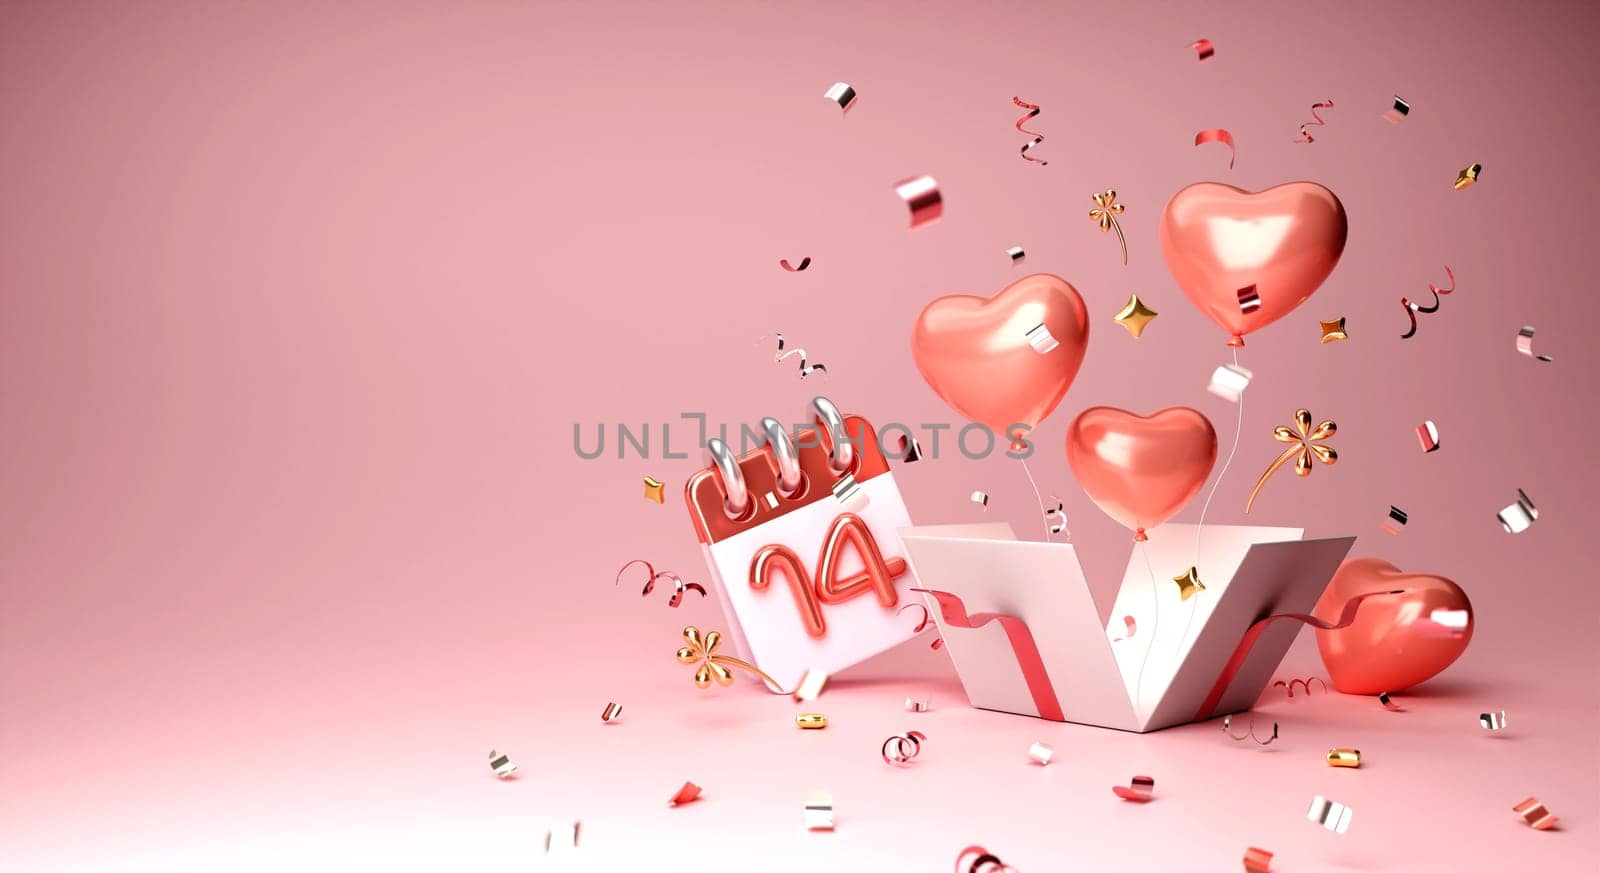 Happy Valentines day background with calendar date 14 February, Rose gold luxury, glitter confetti, open present with heart shape balloon, copy space text, 3D rendering illustration by meepiangraphic